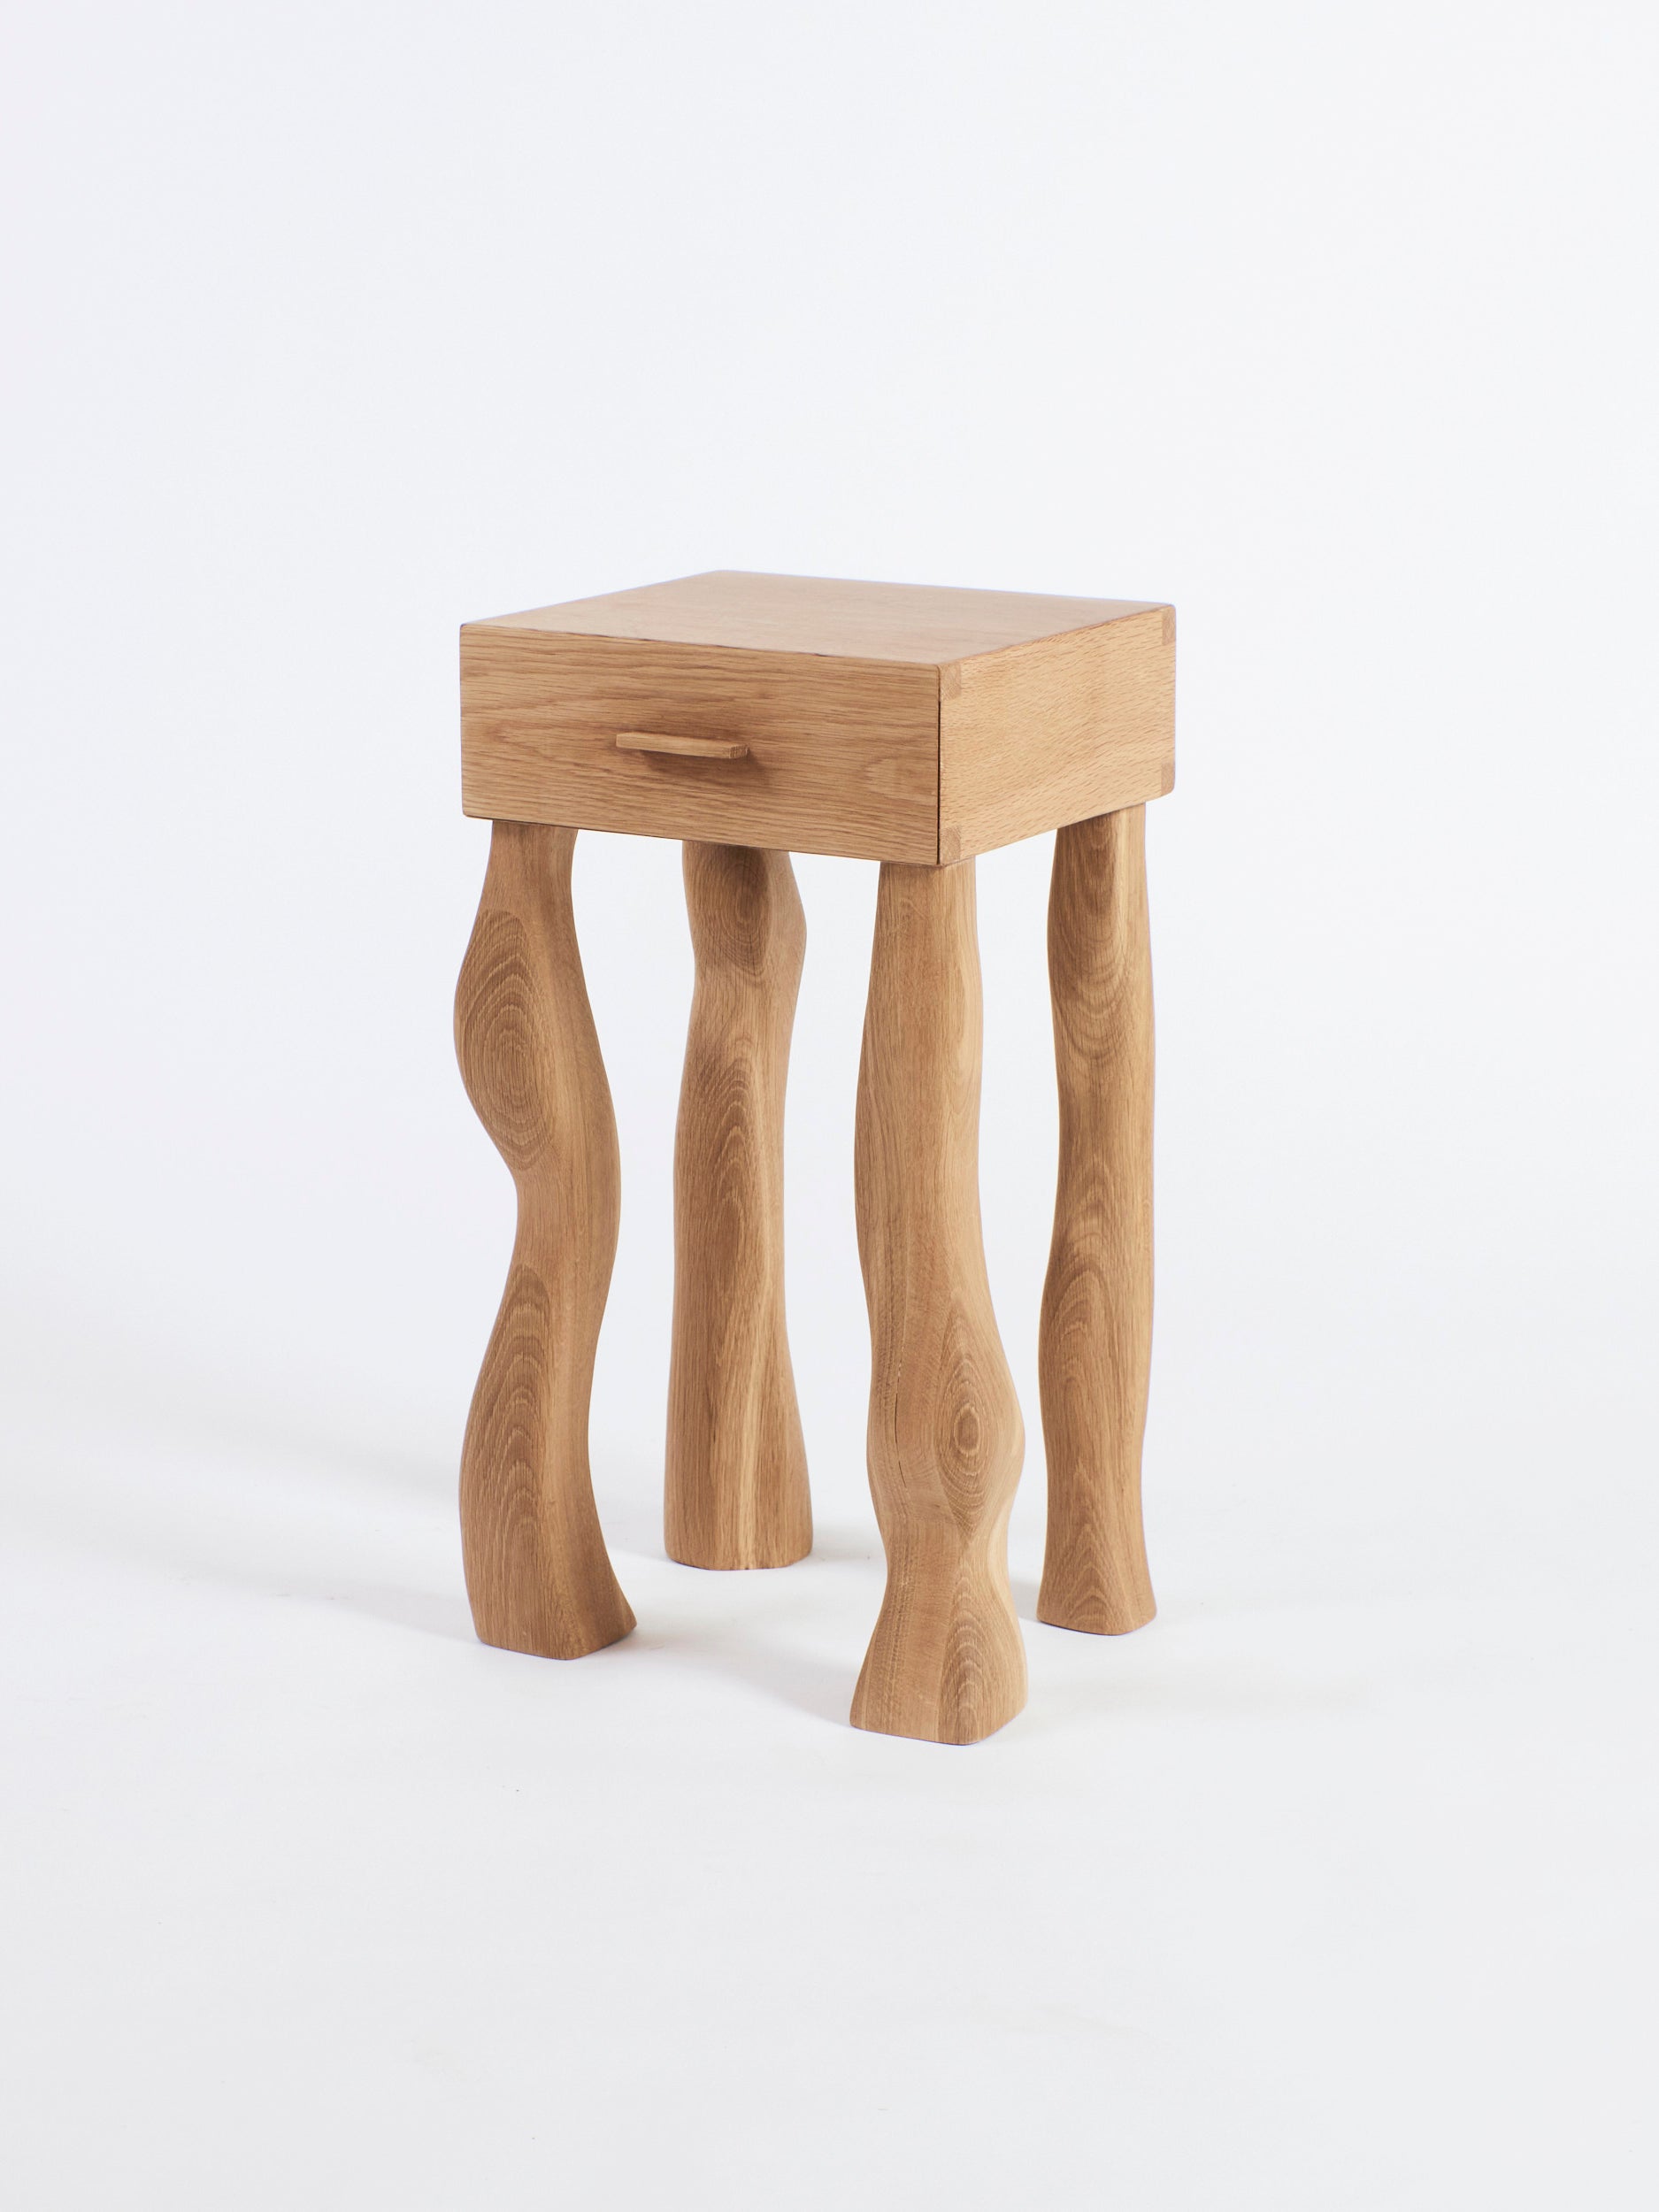 Side Table in Oak - No Foot End Tables